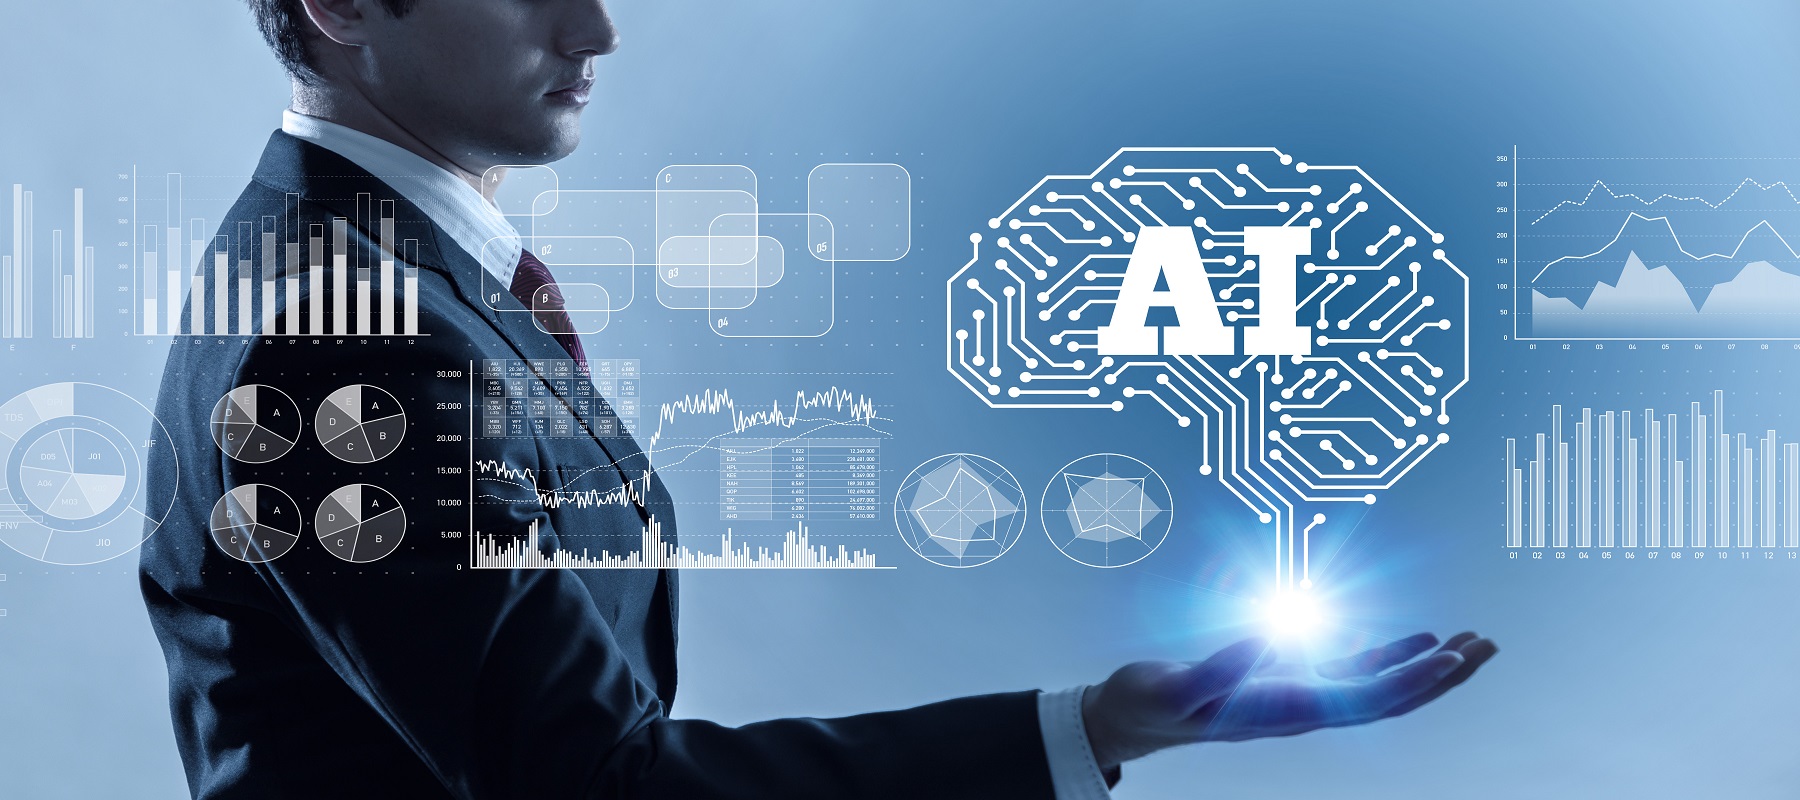 Artificial intelligence in retail market expected to reach $57.8 billion by 2030, report